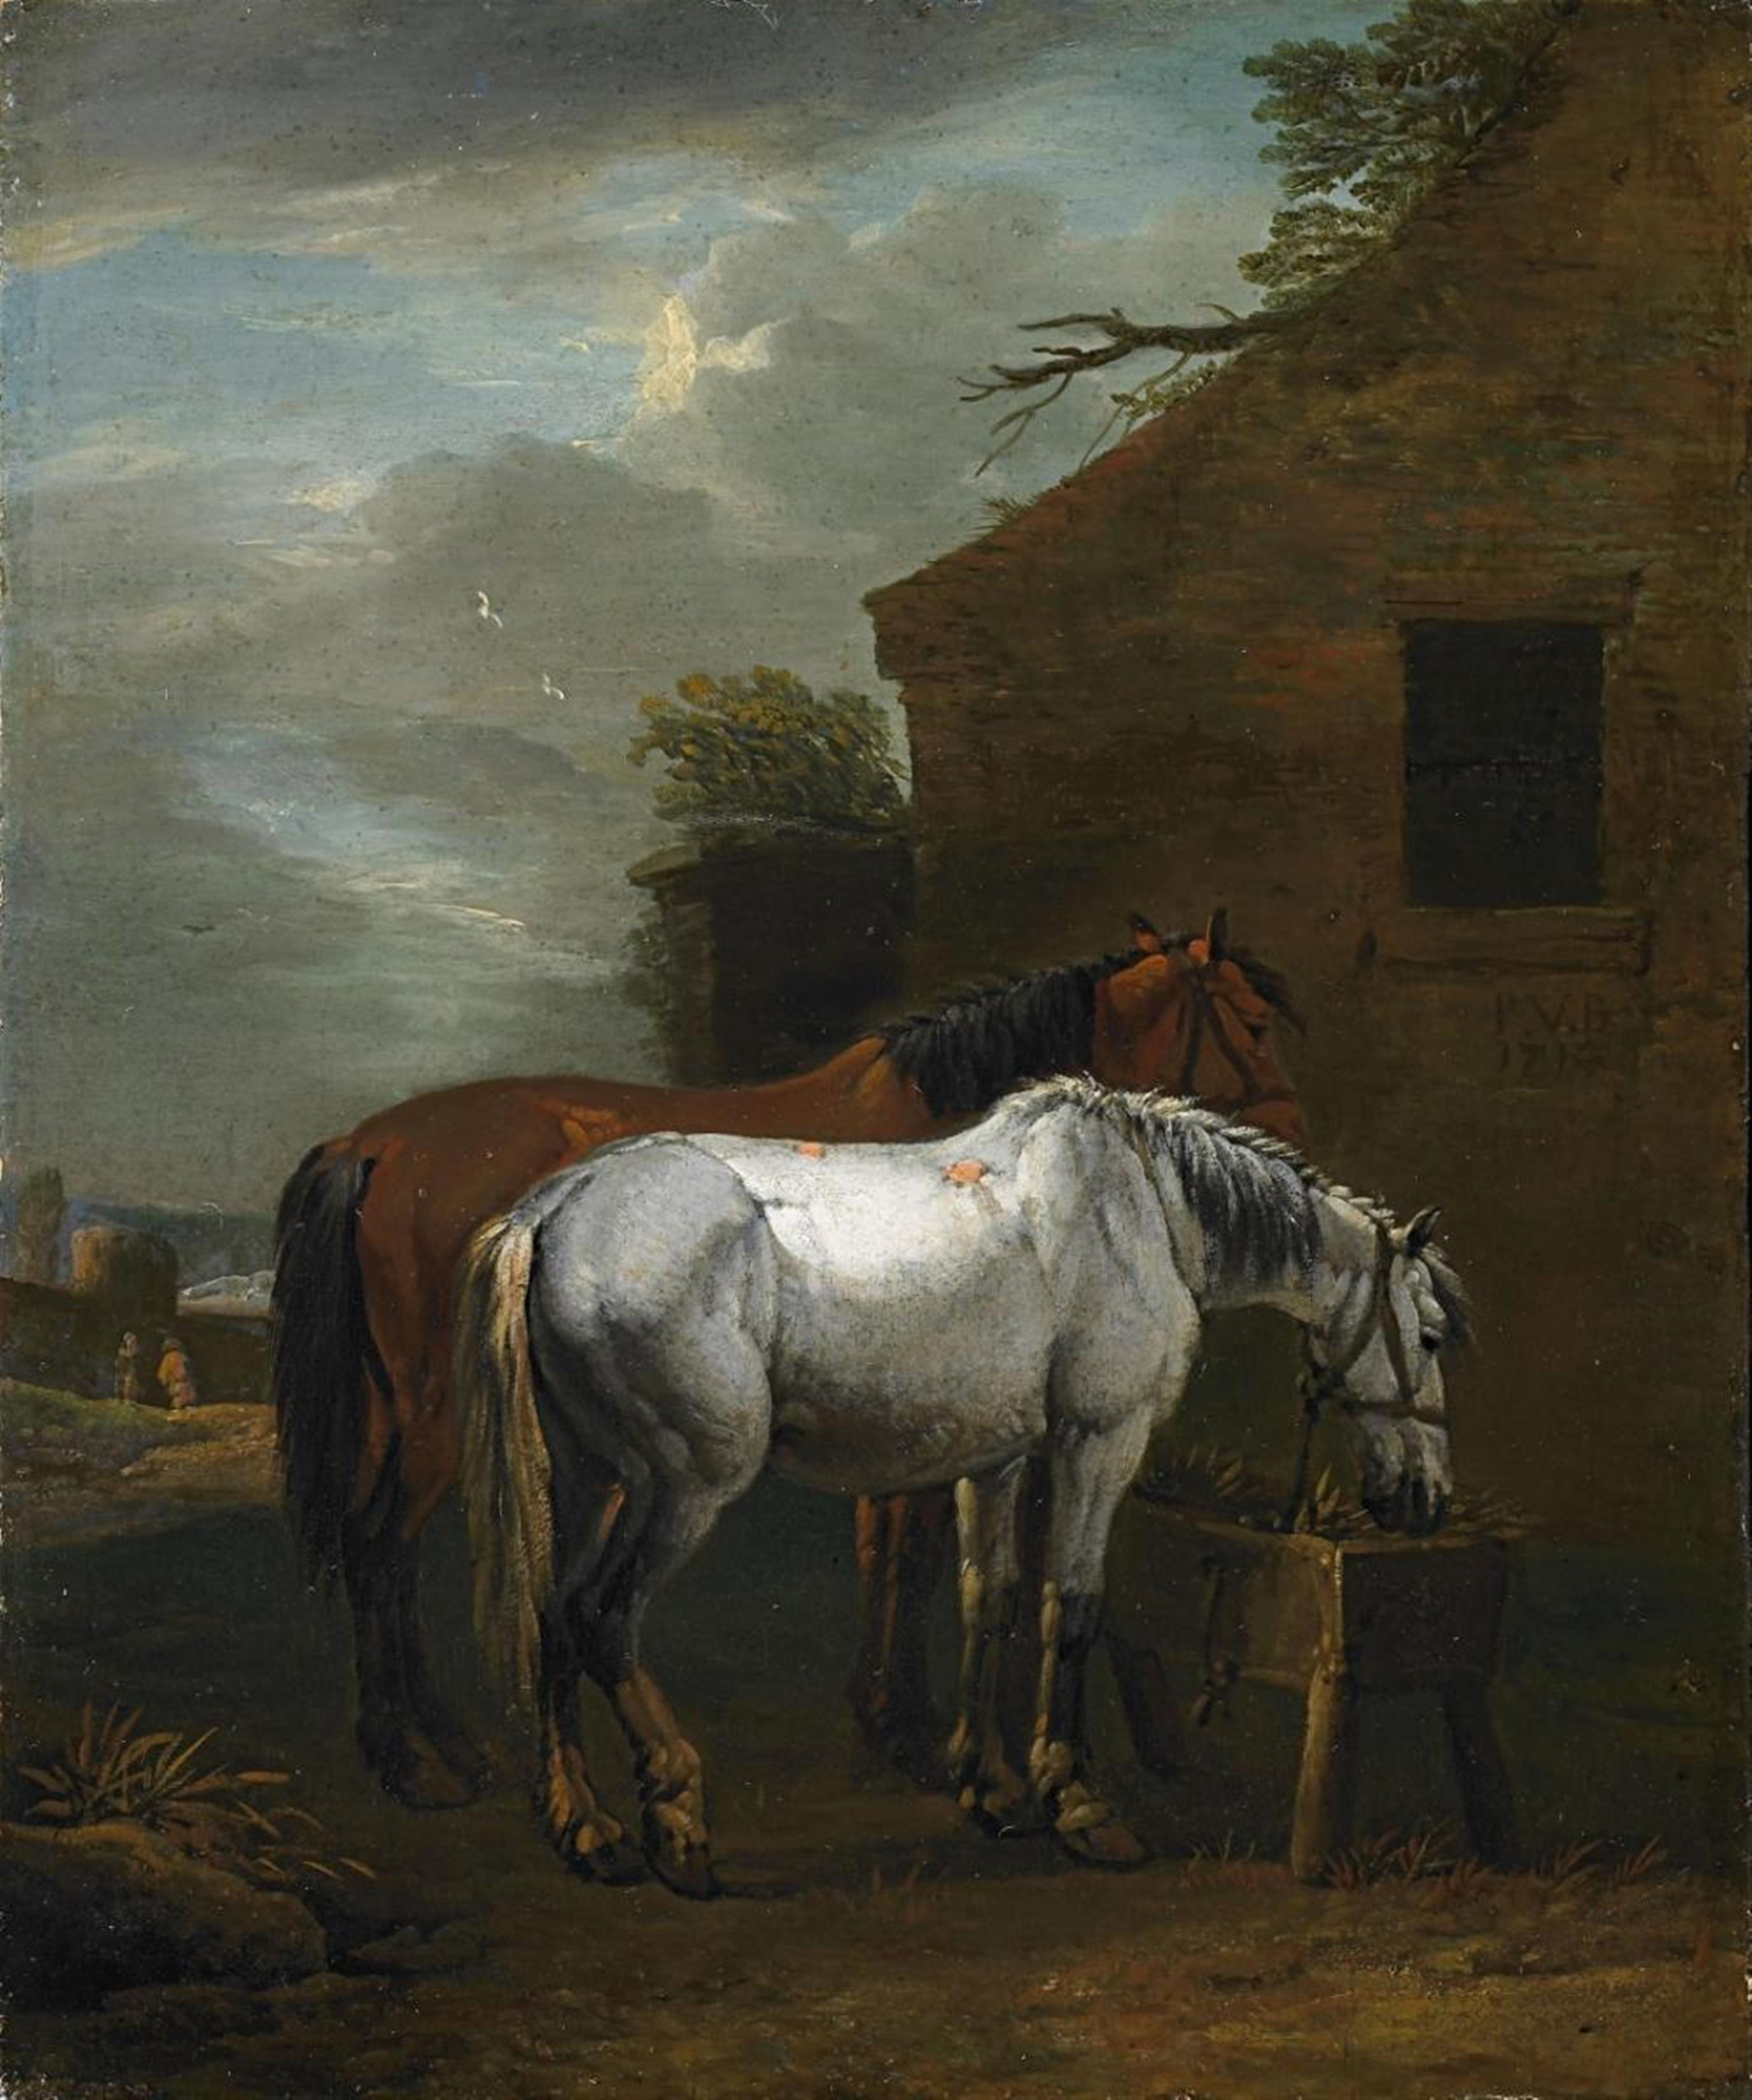 Pieter van Bloemen - TWO HORSES WITH SADDLES AT A WATERING PLACE TWO HORSES WITHOUT SADDLES AT A WATERING PLACE - image-2